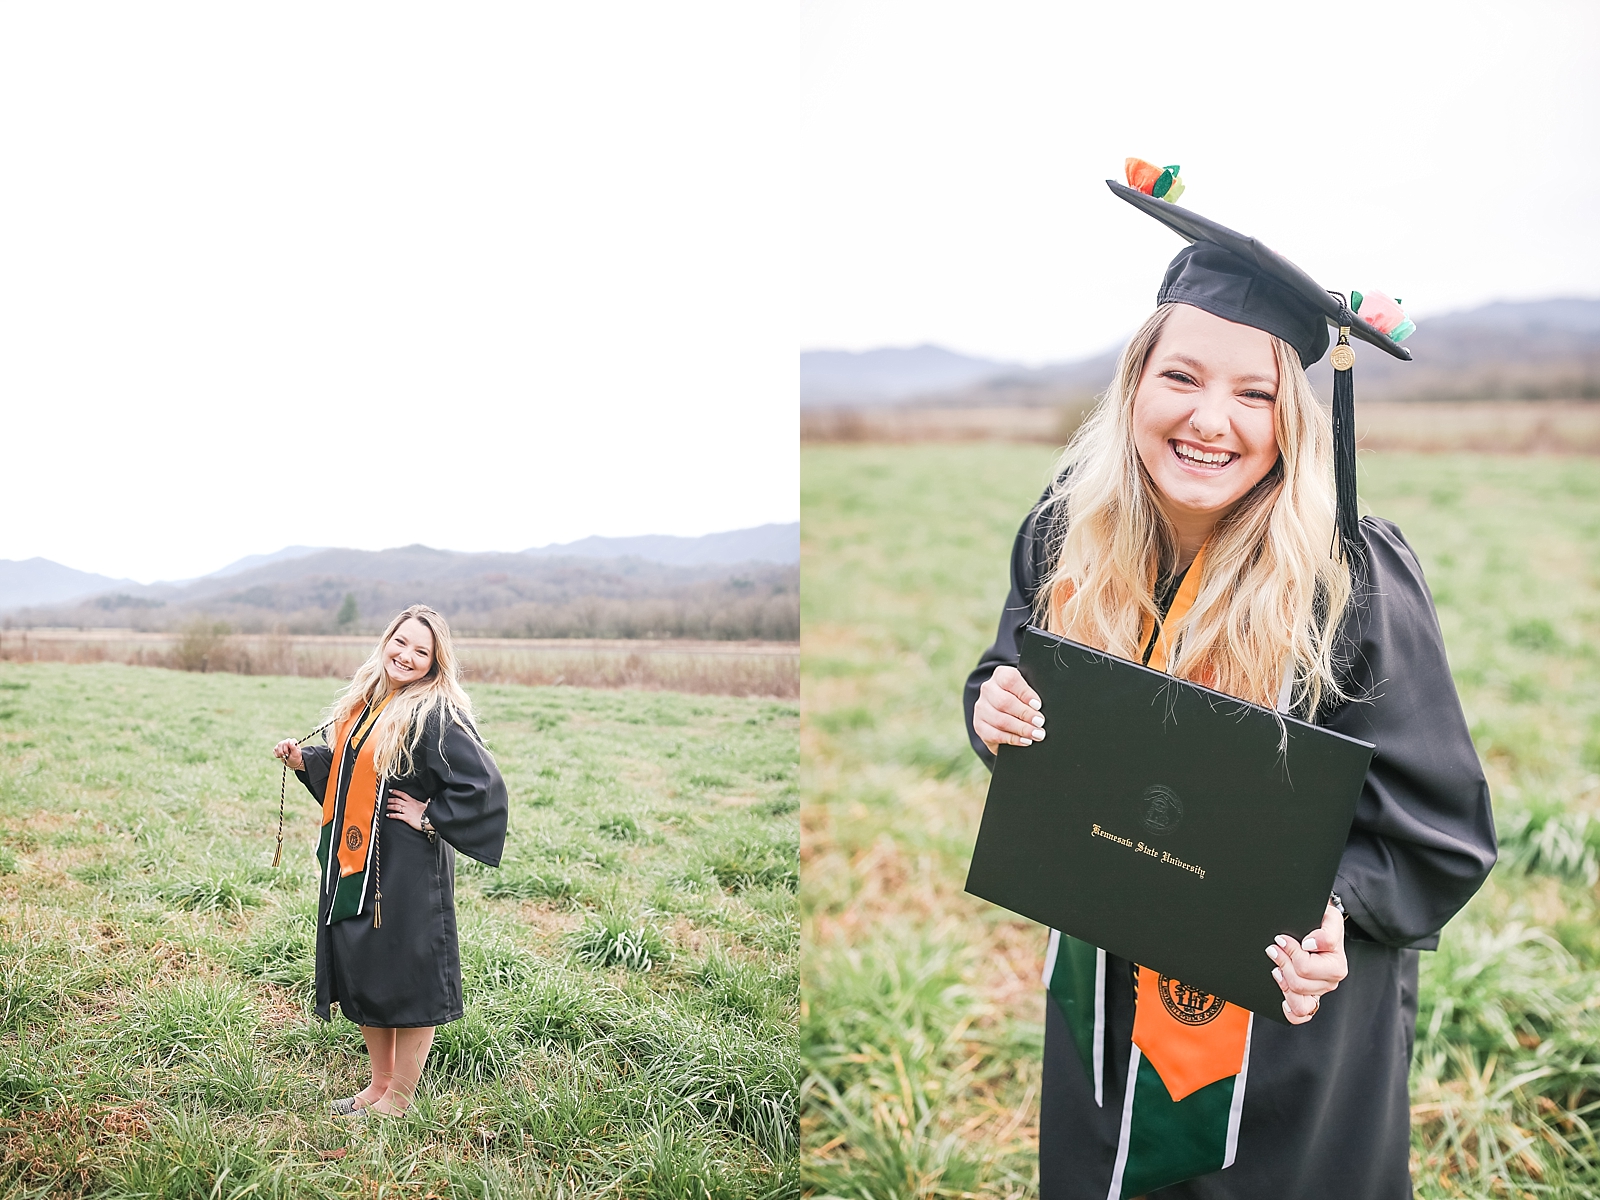 Kennesaw State University Senior Session Rachel smiling at the camera in cap and gown holding diploma photos